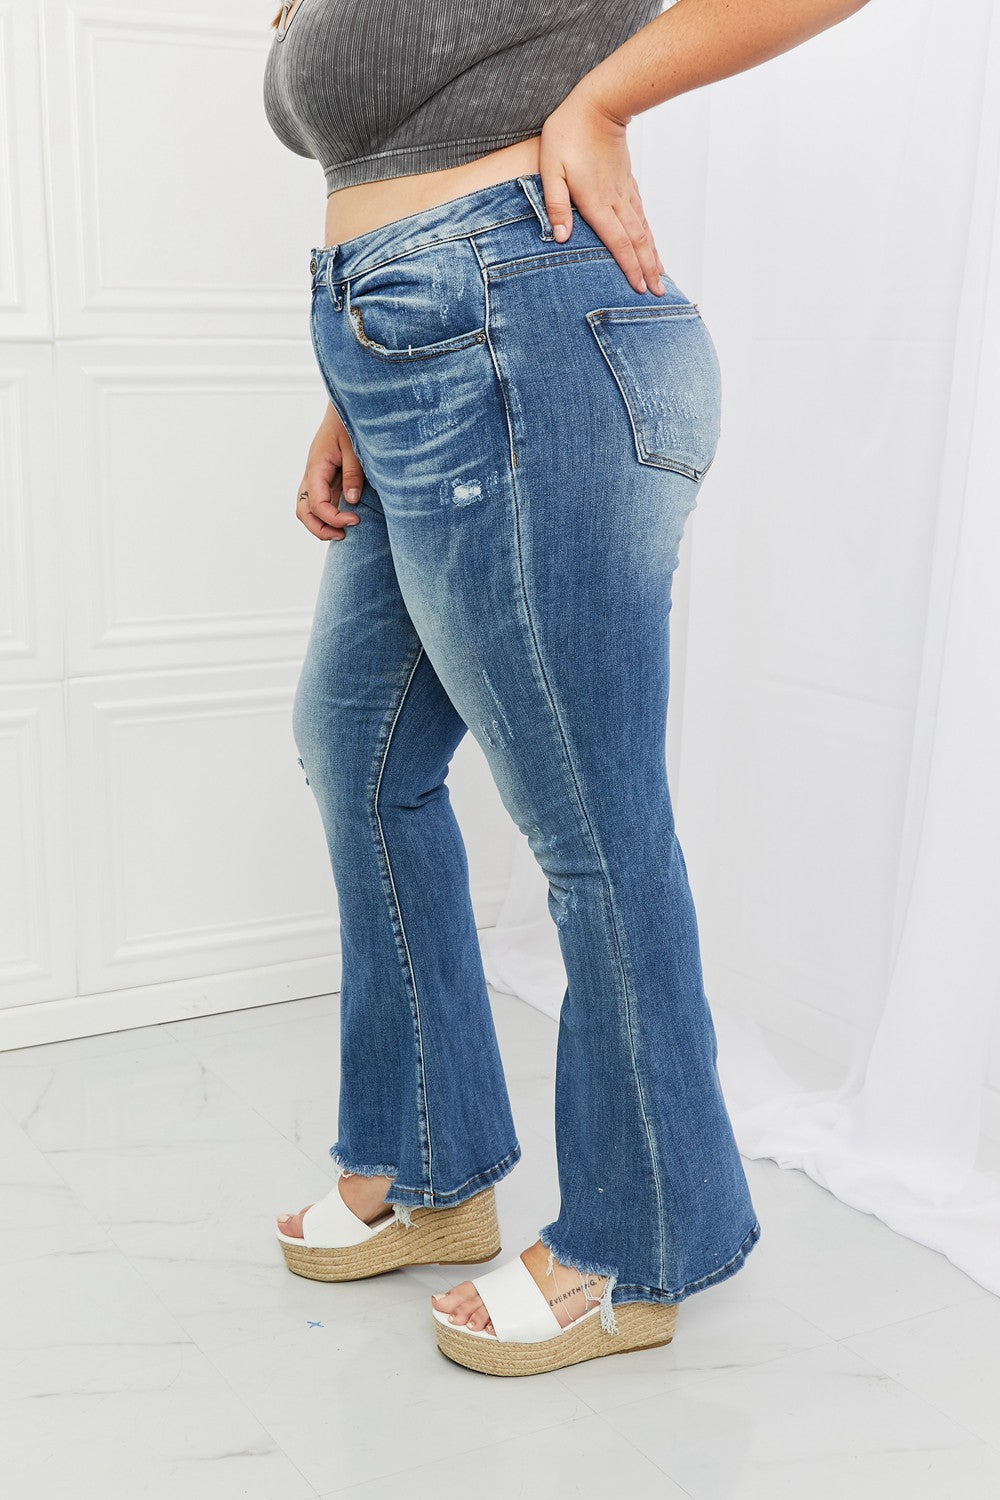 RISEN Iris High Waisted Flare Jeans - ONLINE EXCLUSIVE